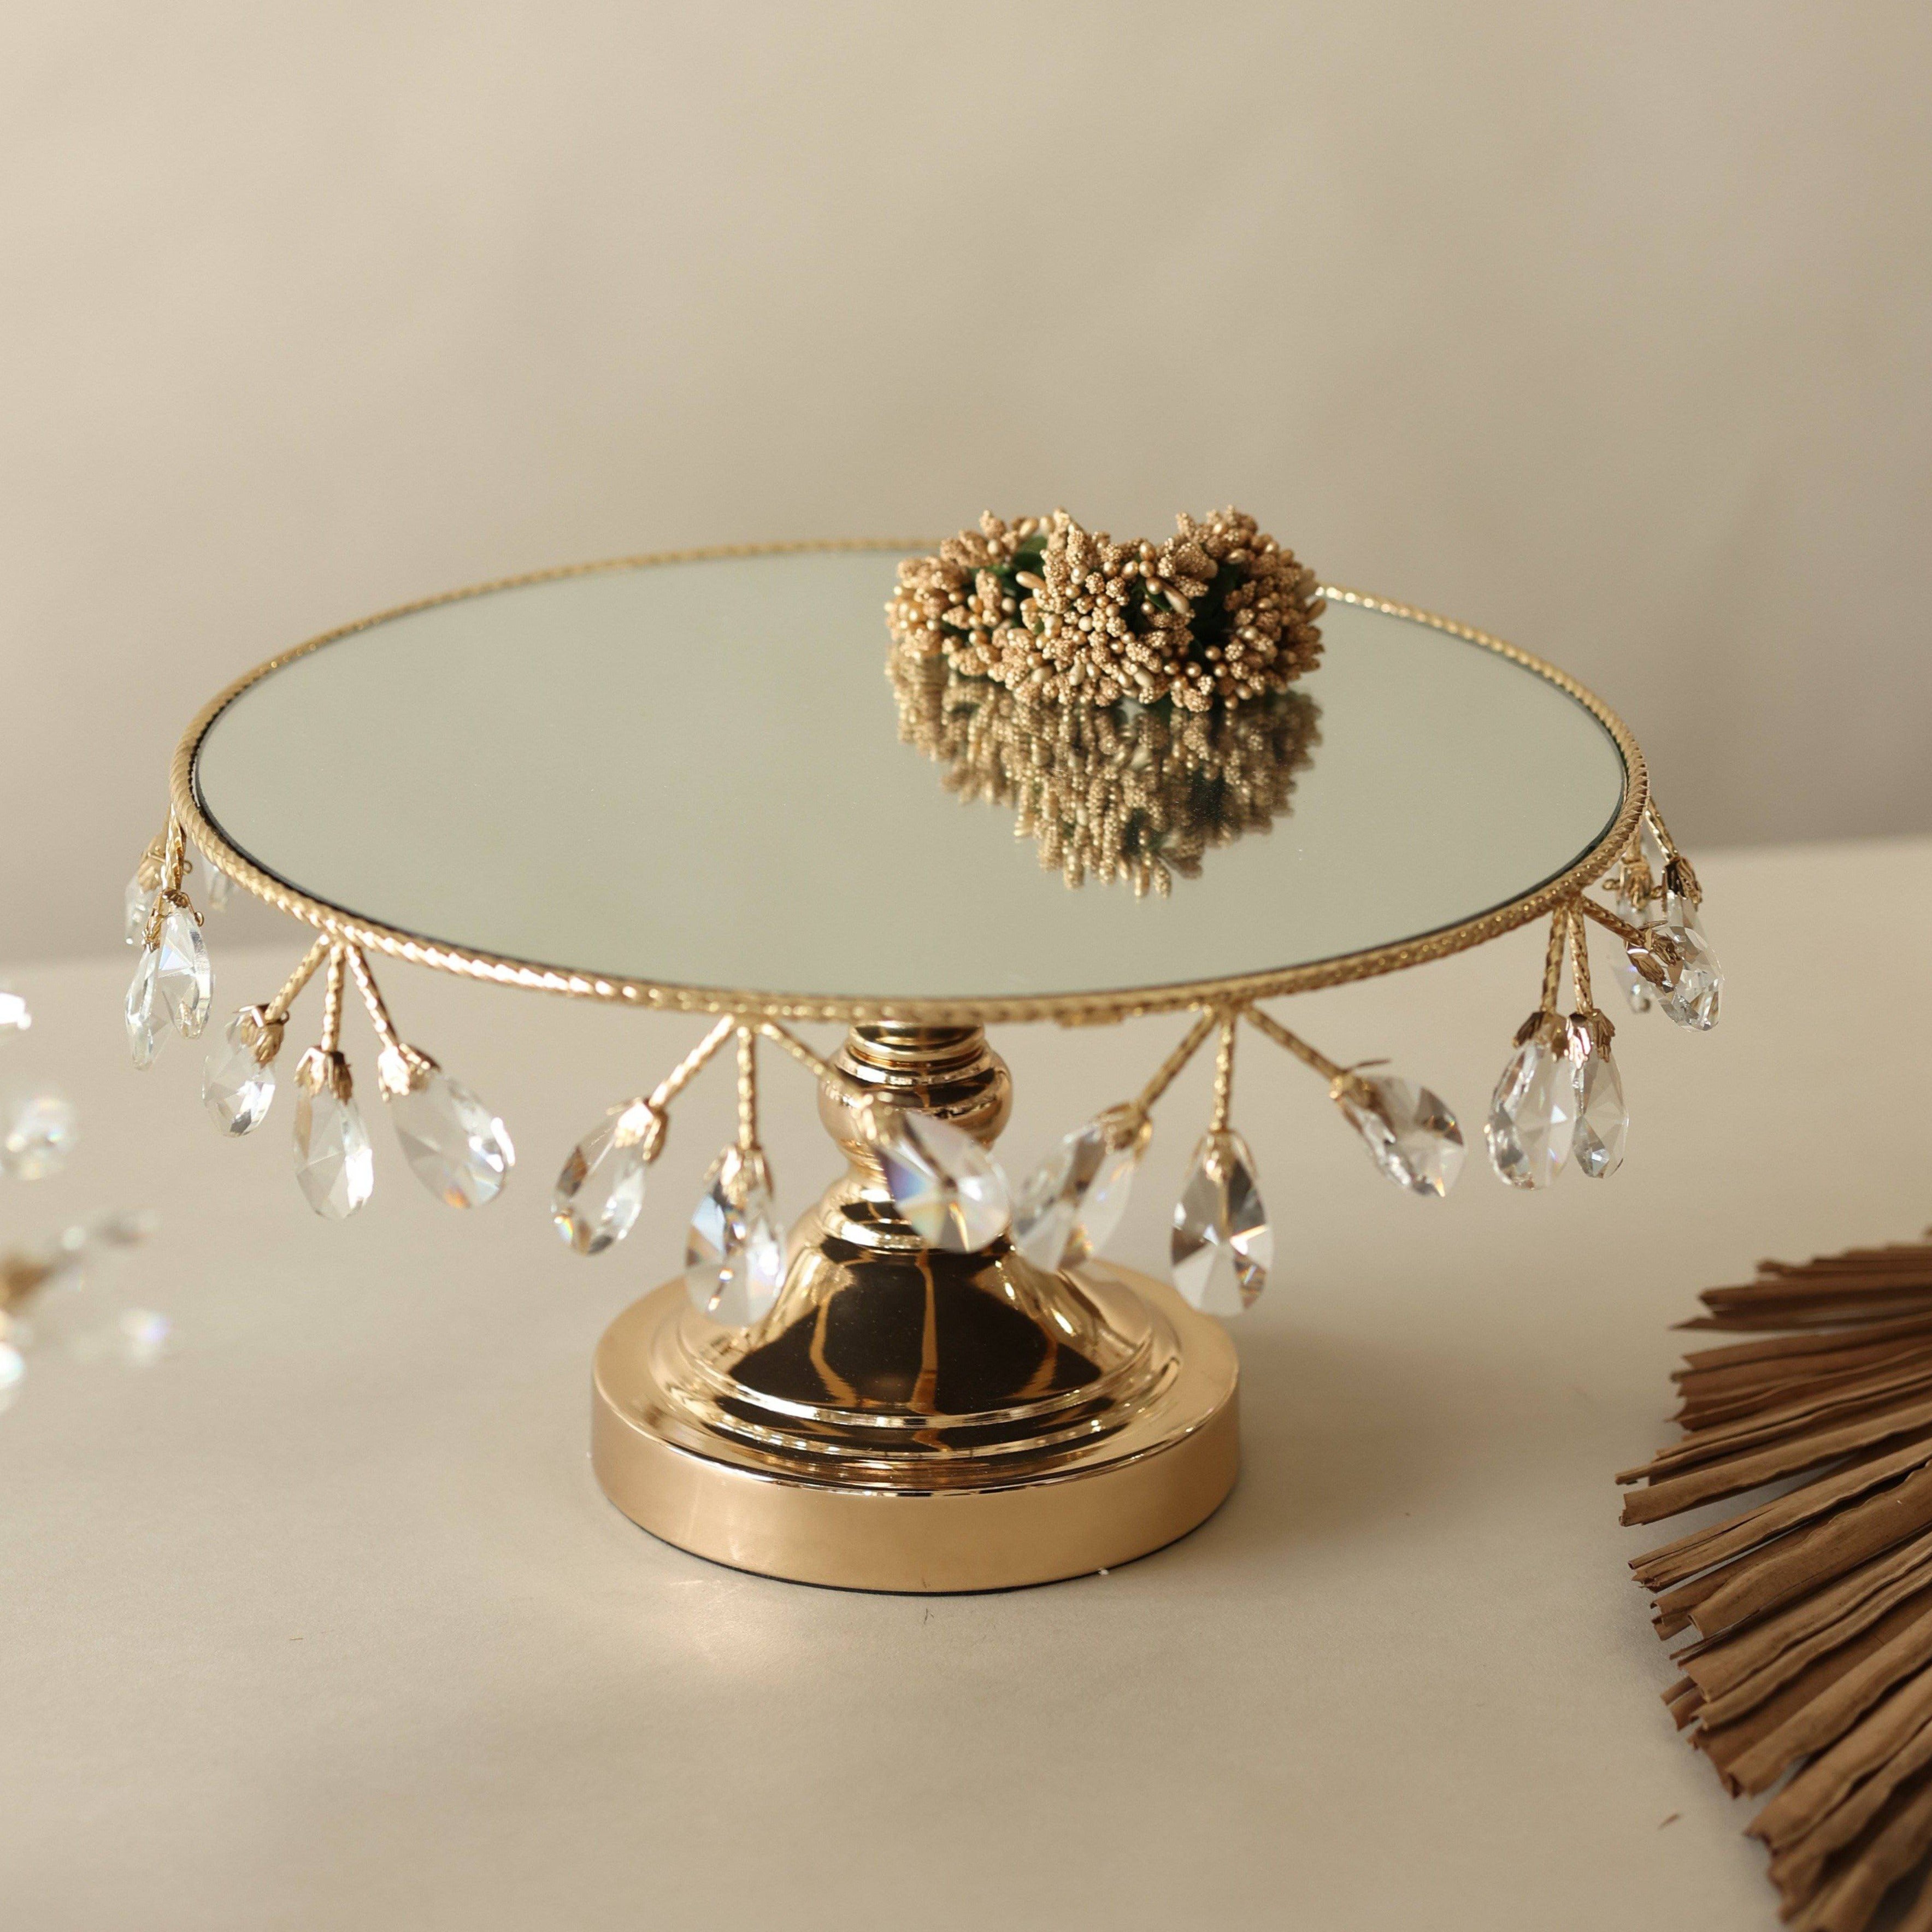 Dublin 4 in 1 Crystal Cake Stand – Details Lancaster